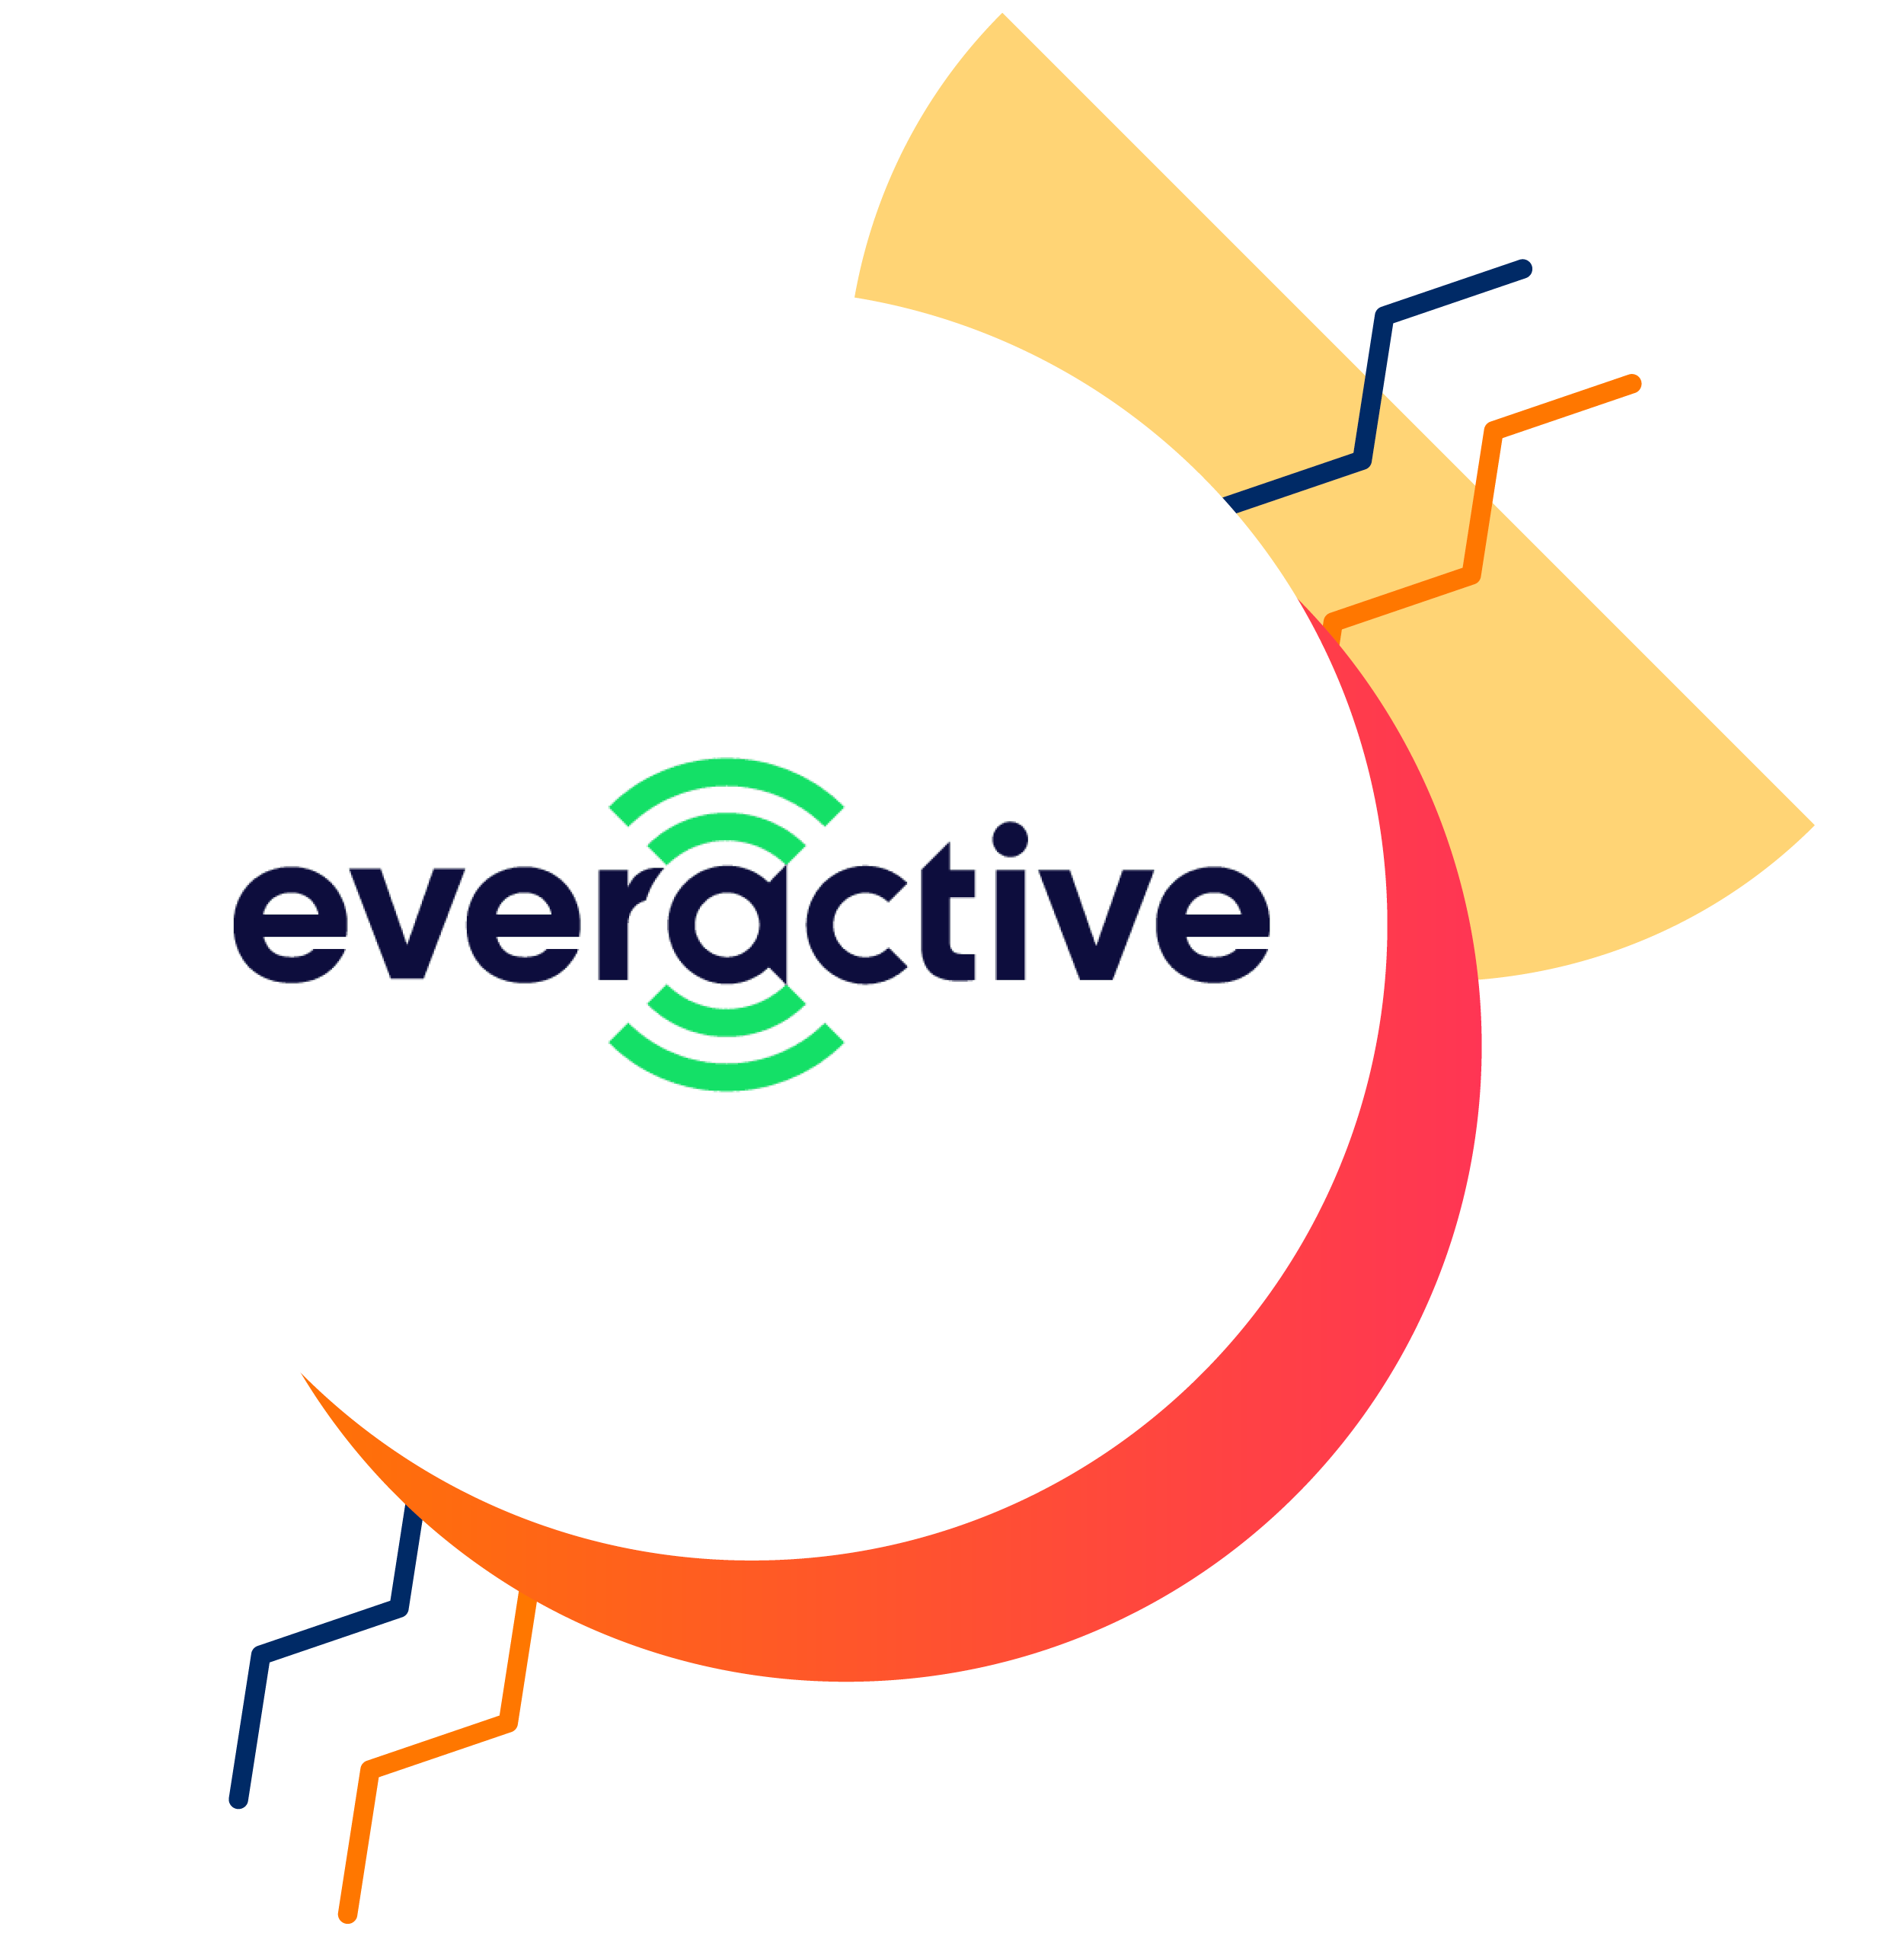 Everactive logo with graphical elements